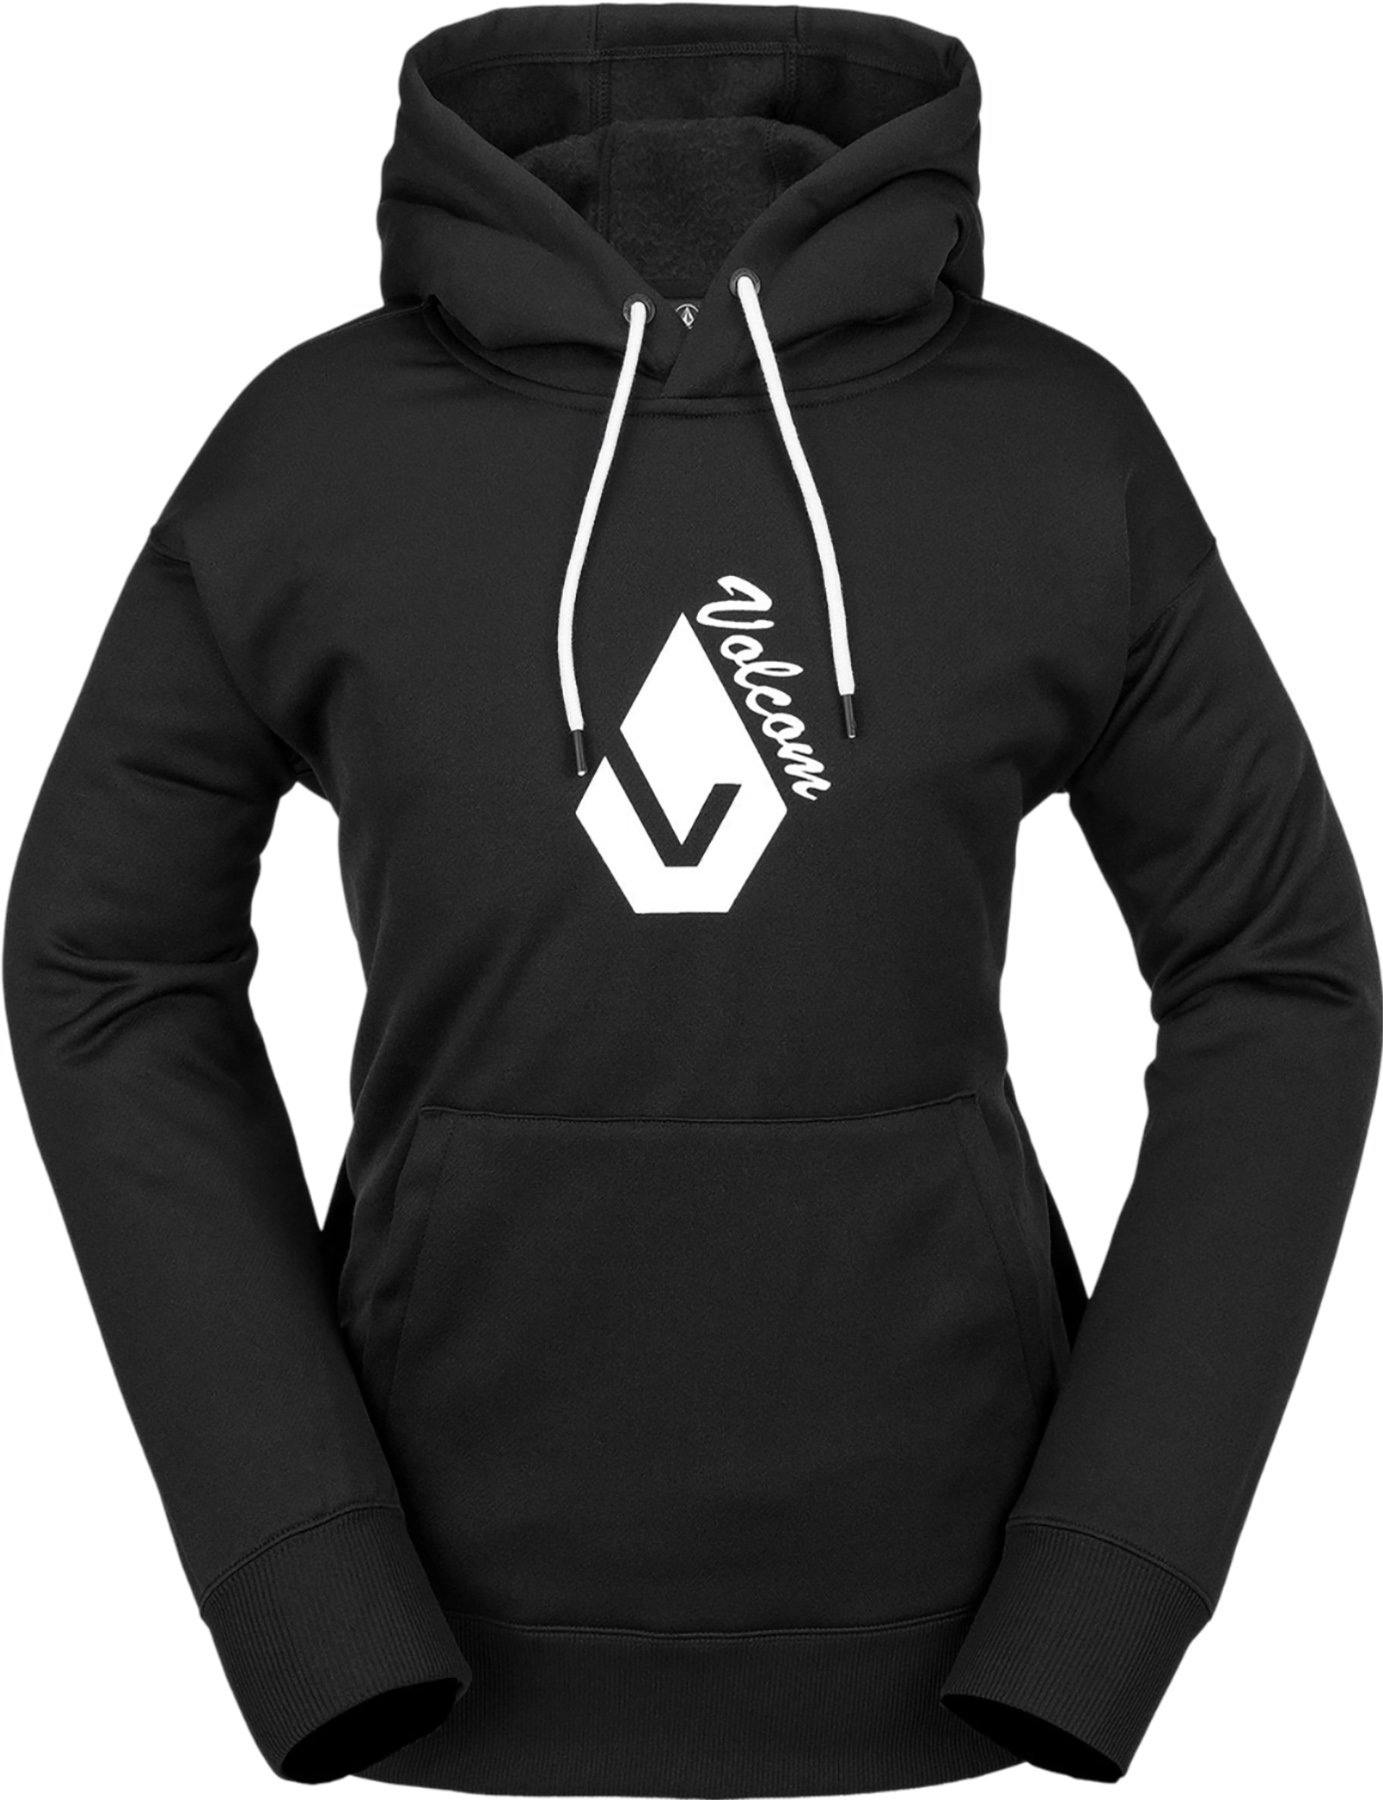 Product image for Core Hydro Hoodie - Women's